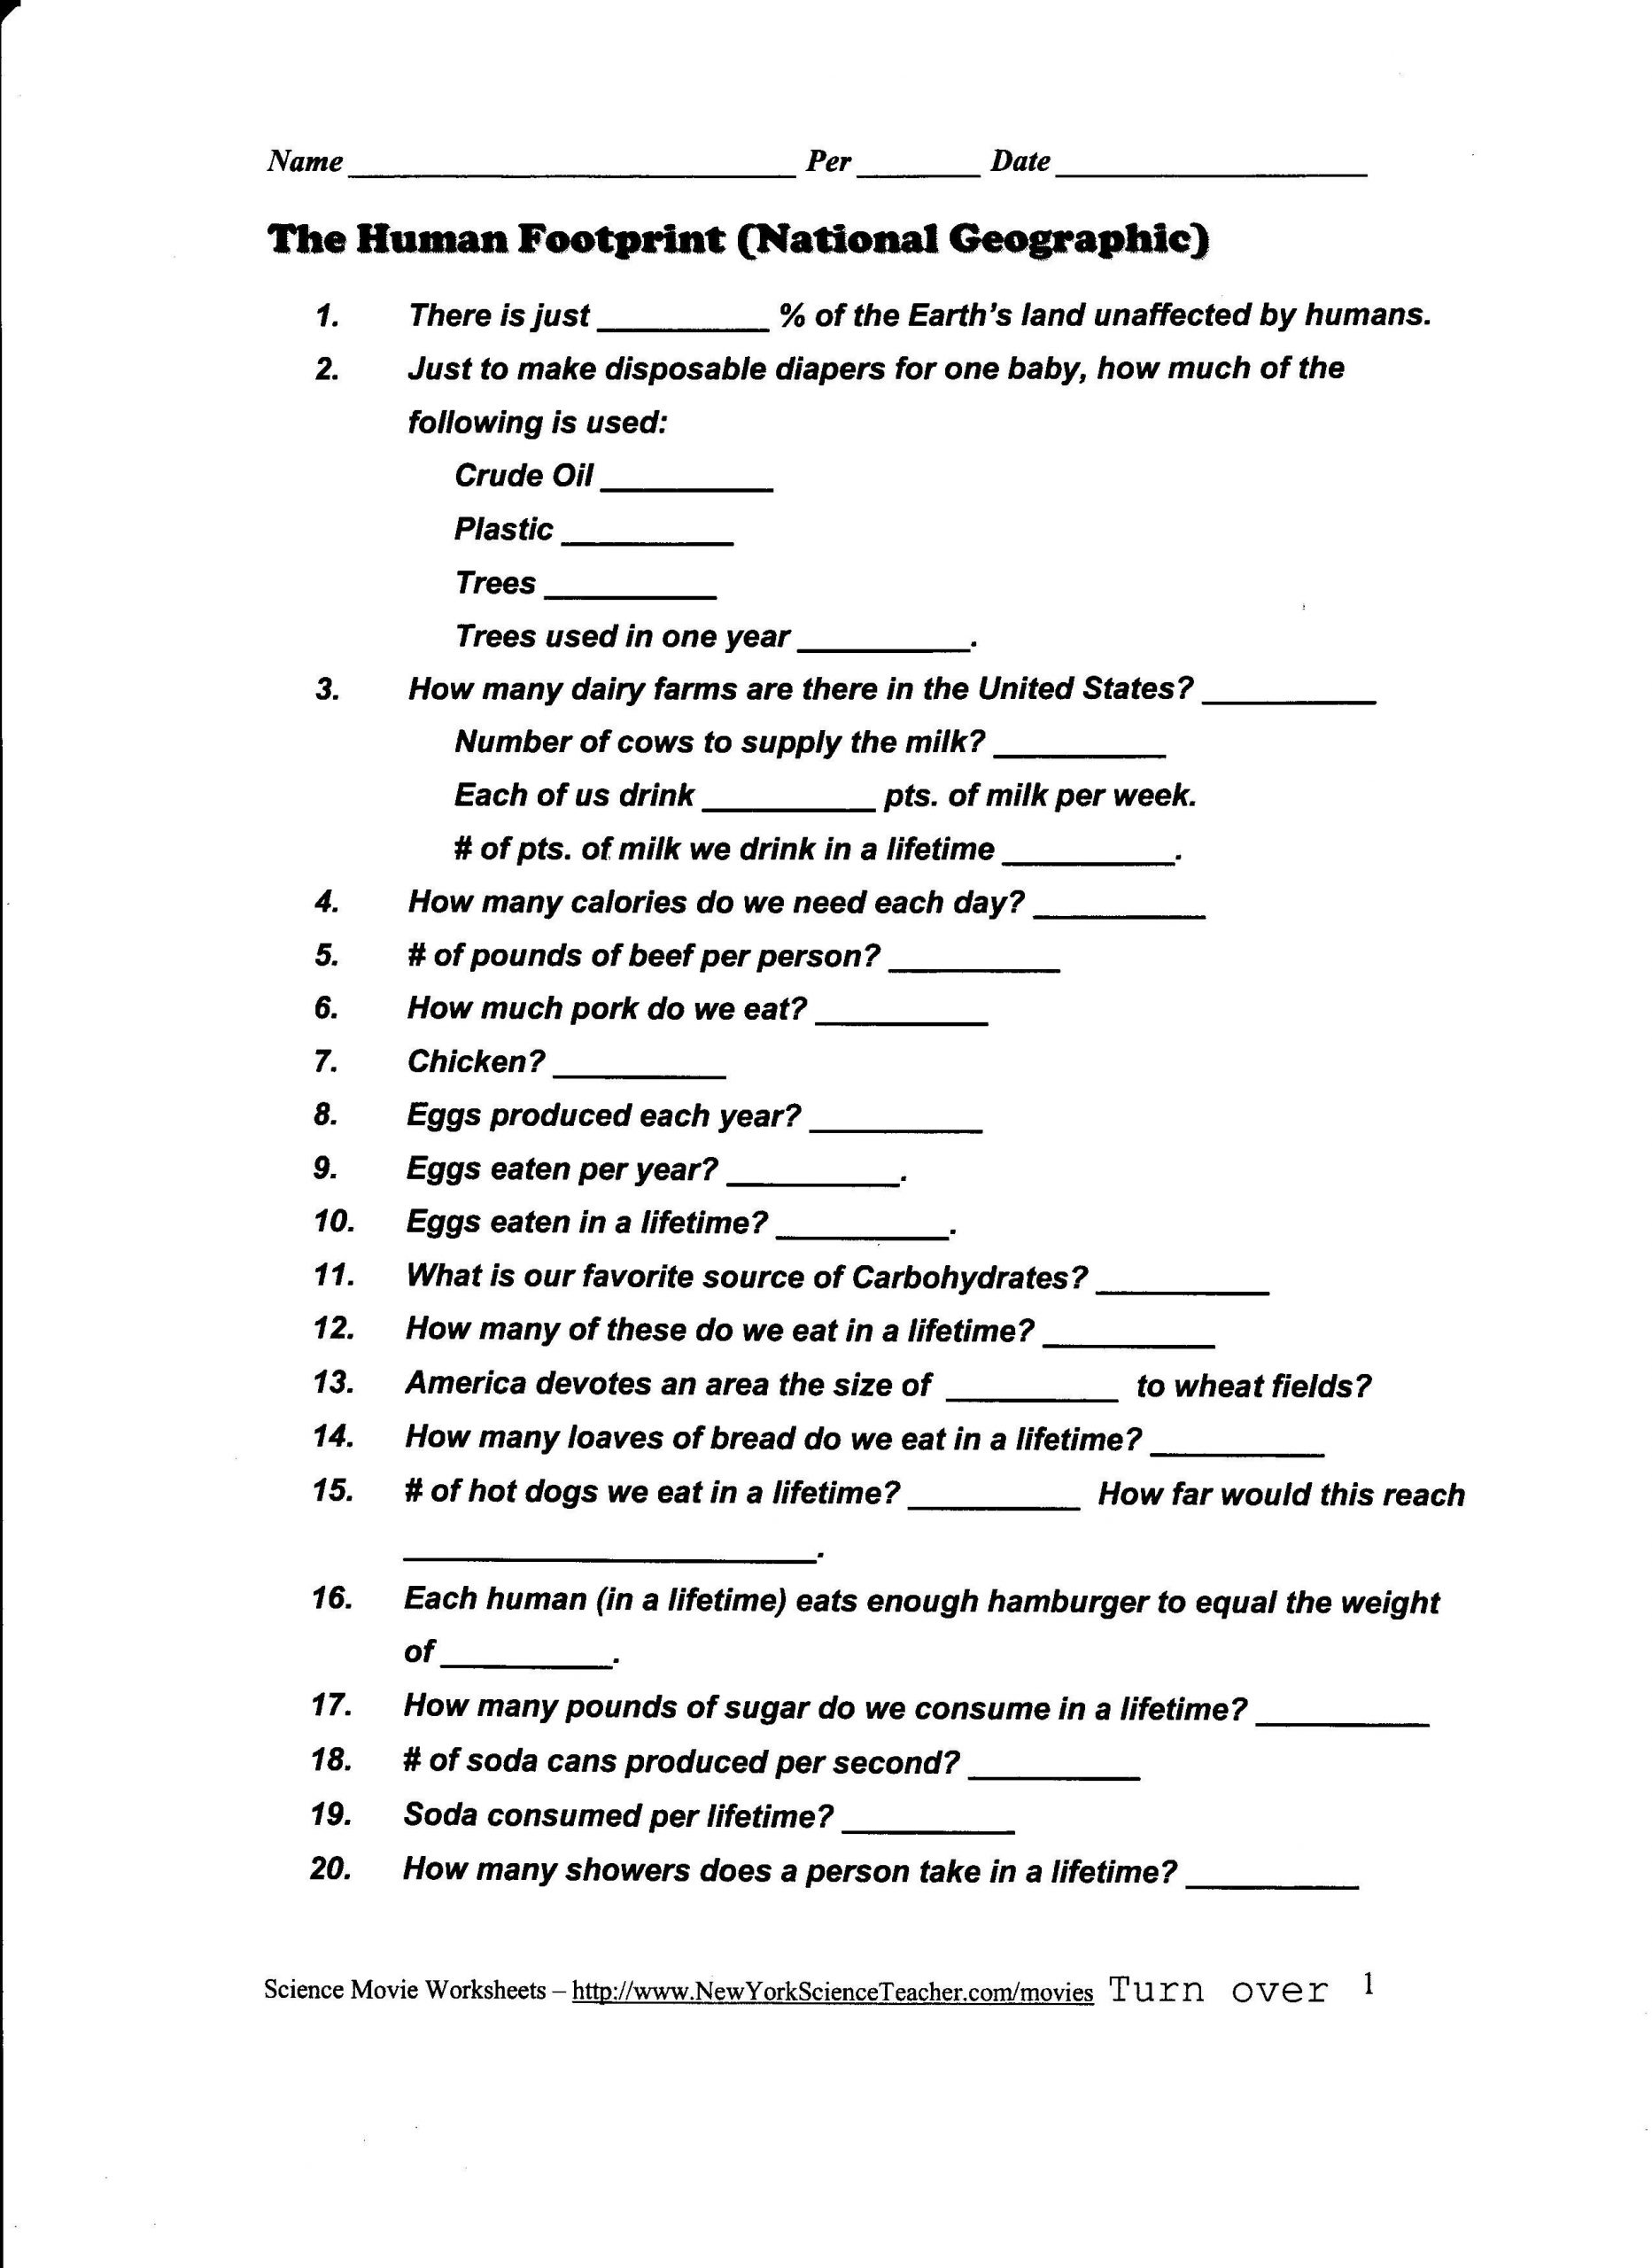 Population Growth Worksheet Answers Population Growth Biology Worksheet Answer Key